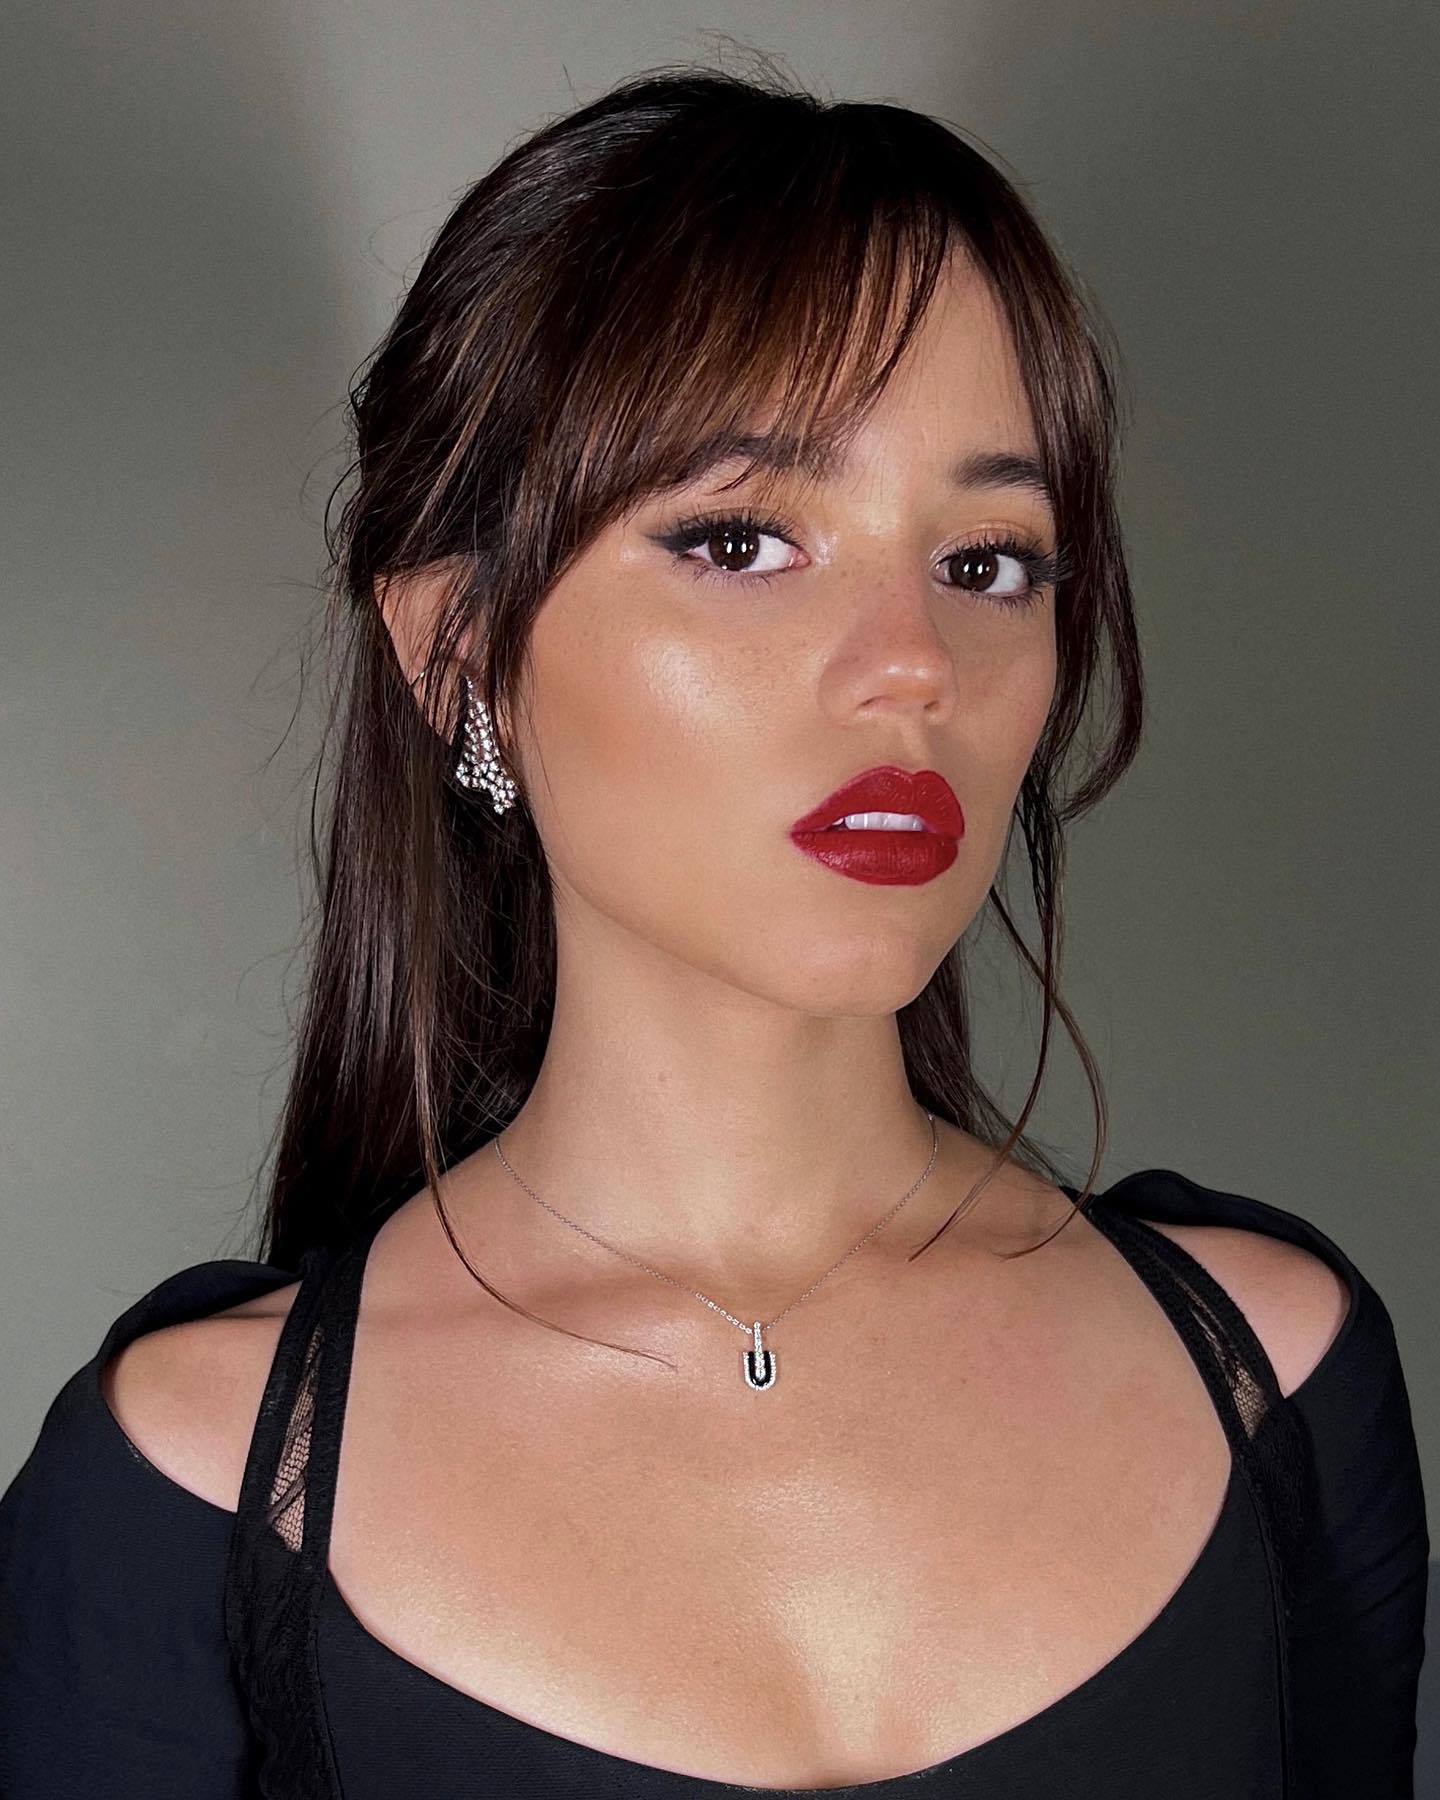 Photos n°30 : Jenna Ortega is Cinched in Silver!